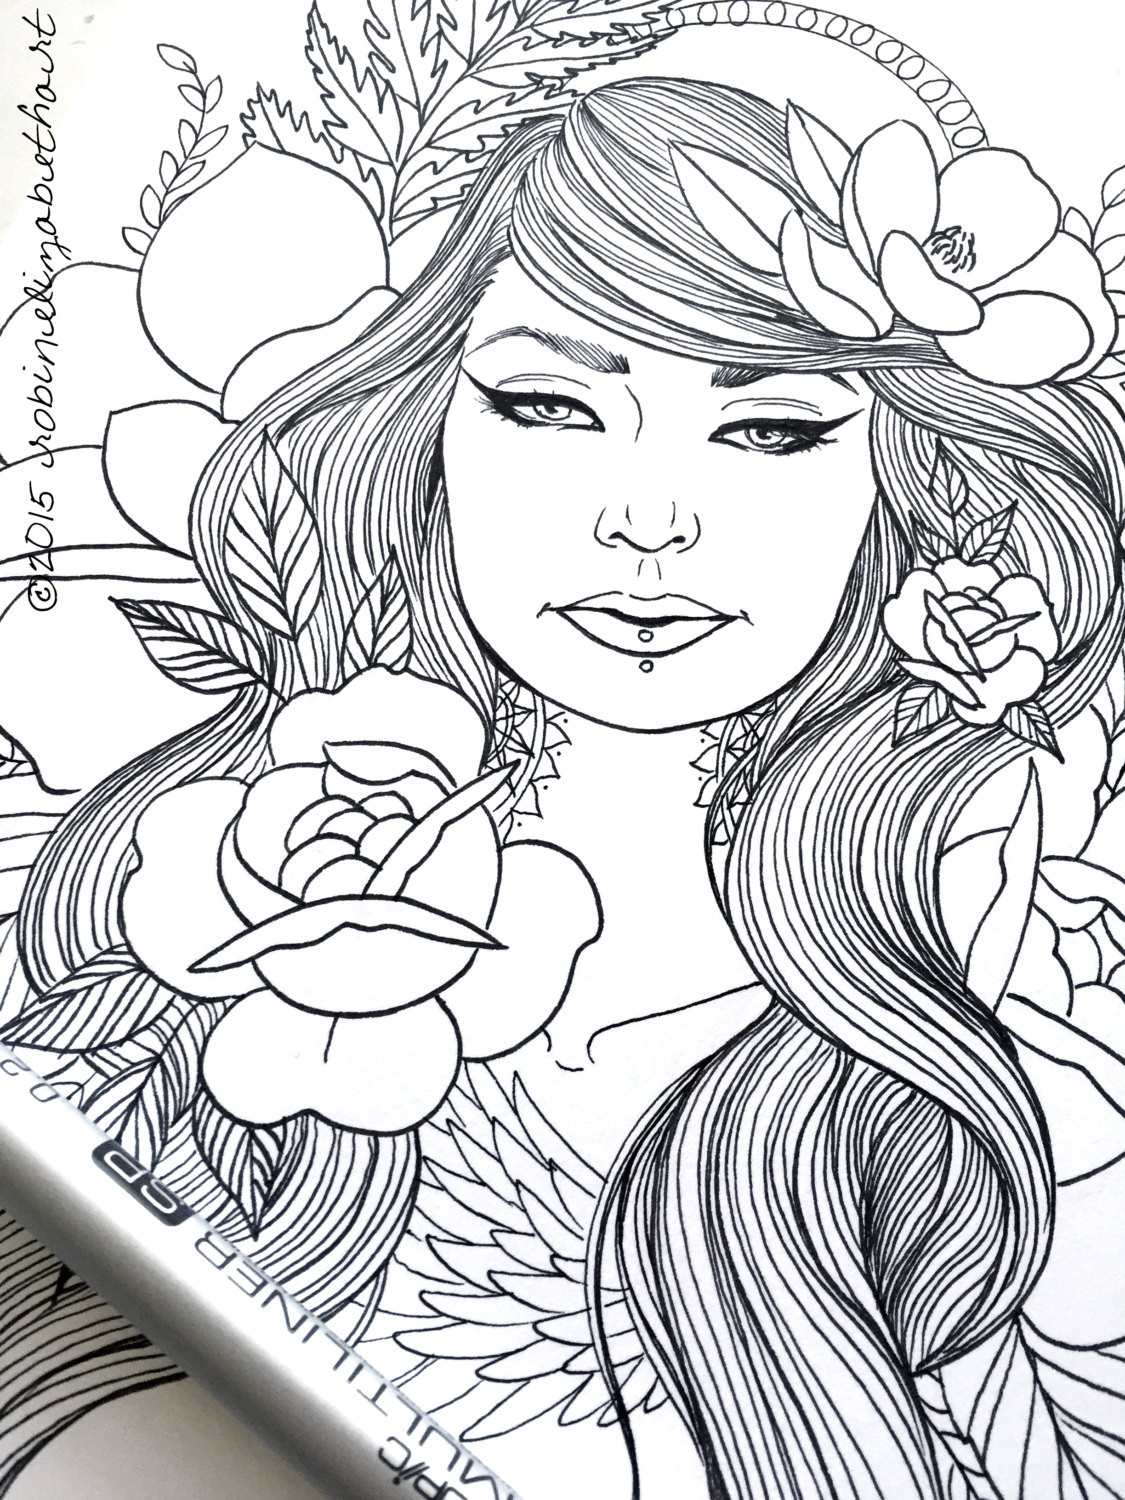 Girl Coloring Pages For Adults
 Girls with Tattoos Pack Adult Coloring Pages Magnolias